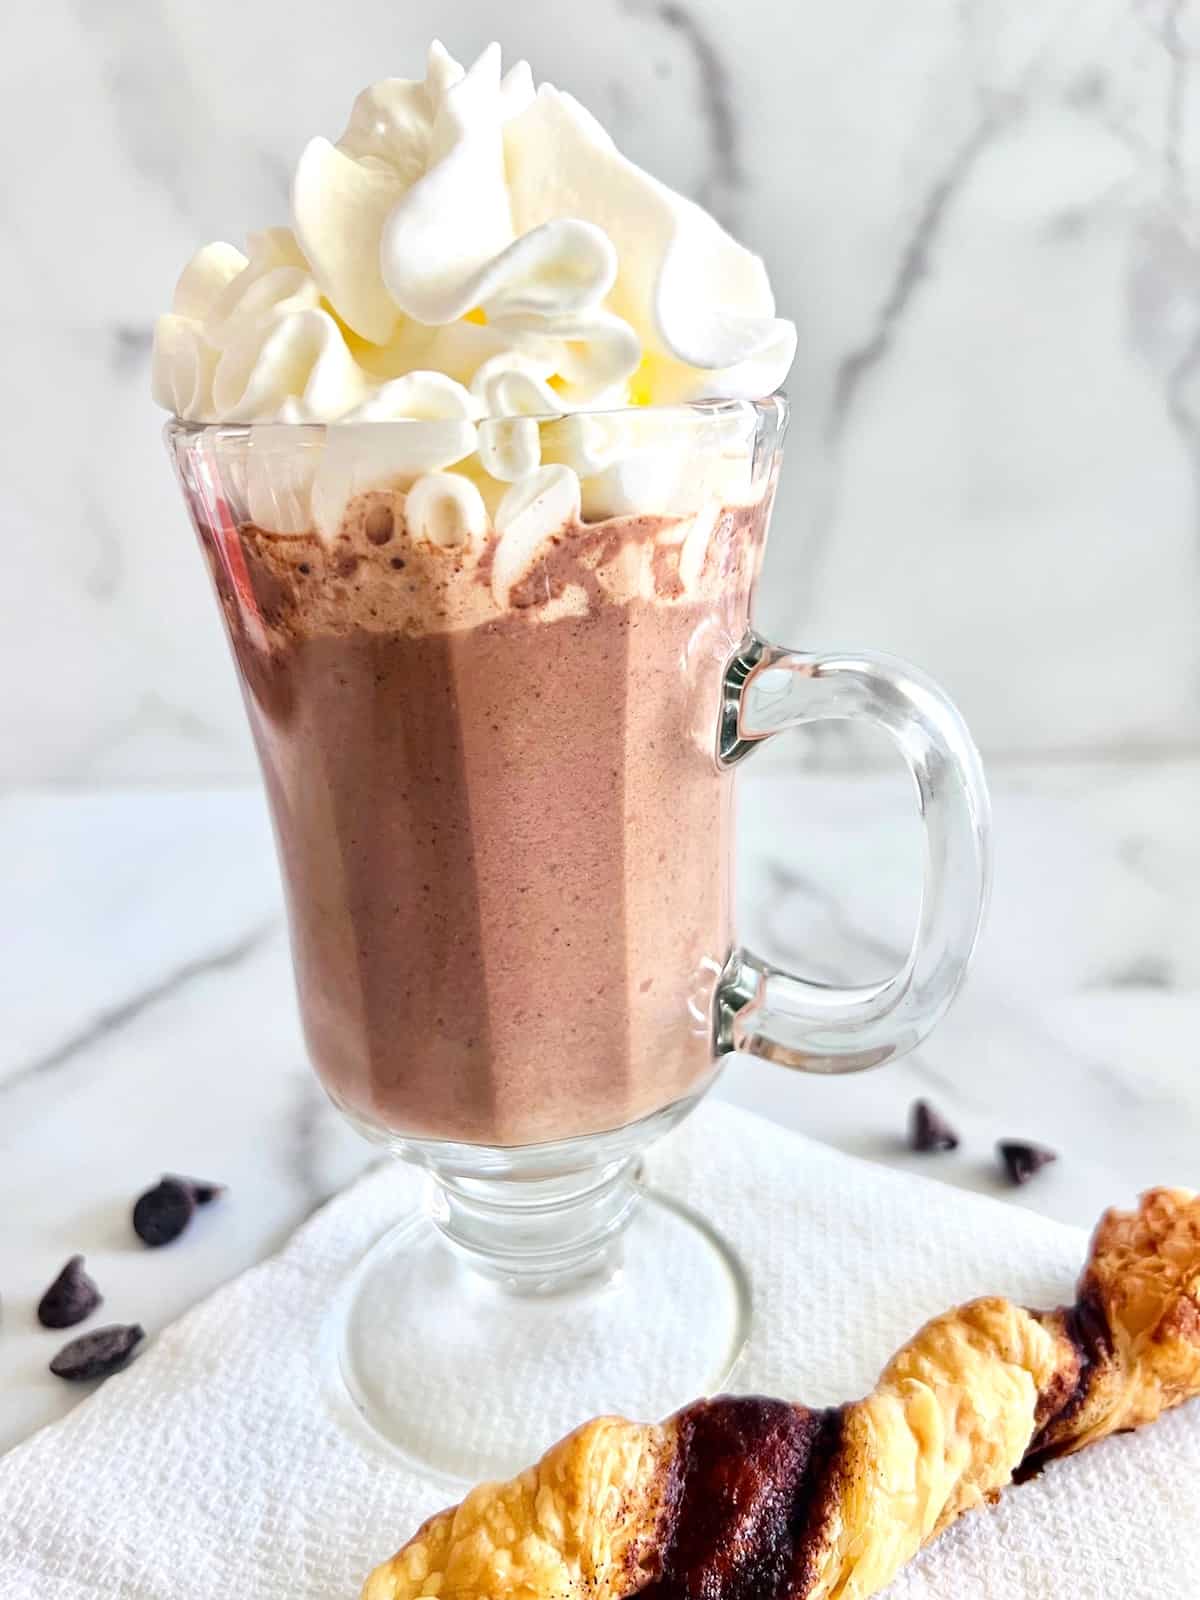 Best Hot Chocolate with Chocolate Chips in a glass topped wtih whipped cream and served wtih a cinnamon twist puff pastry.